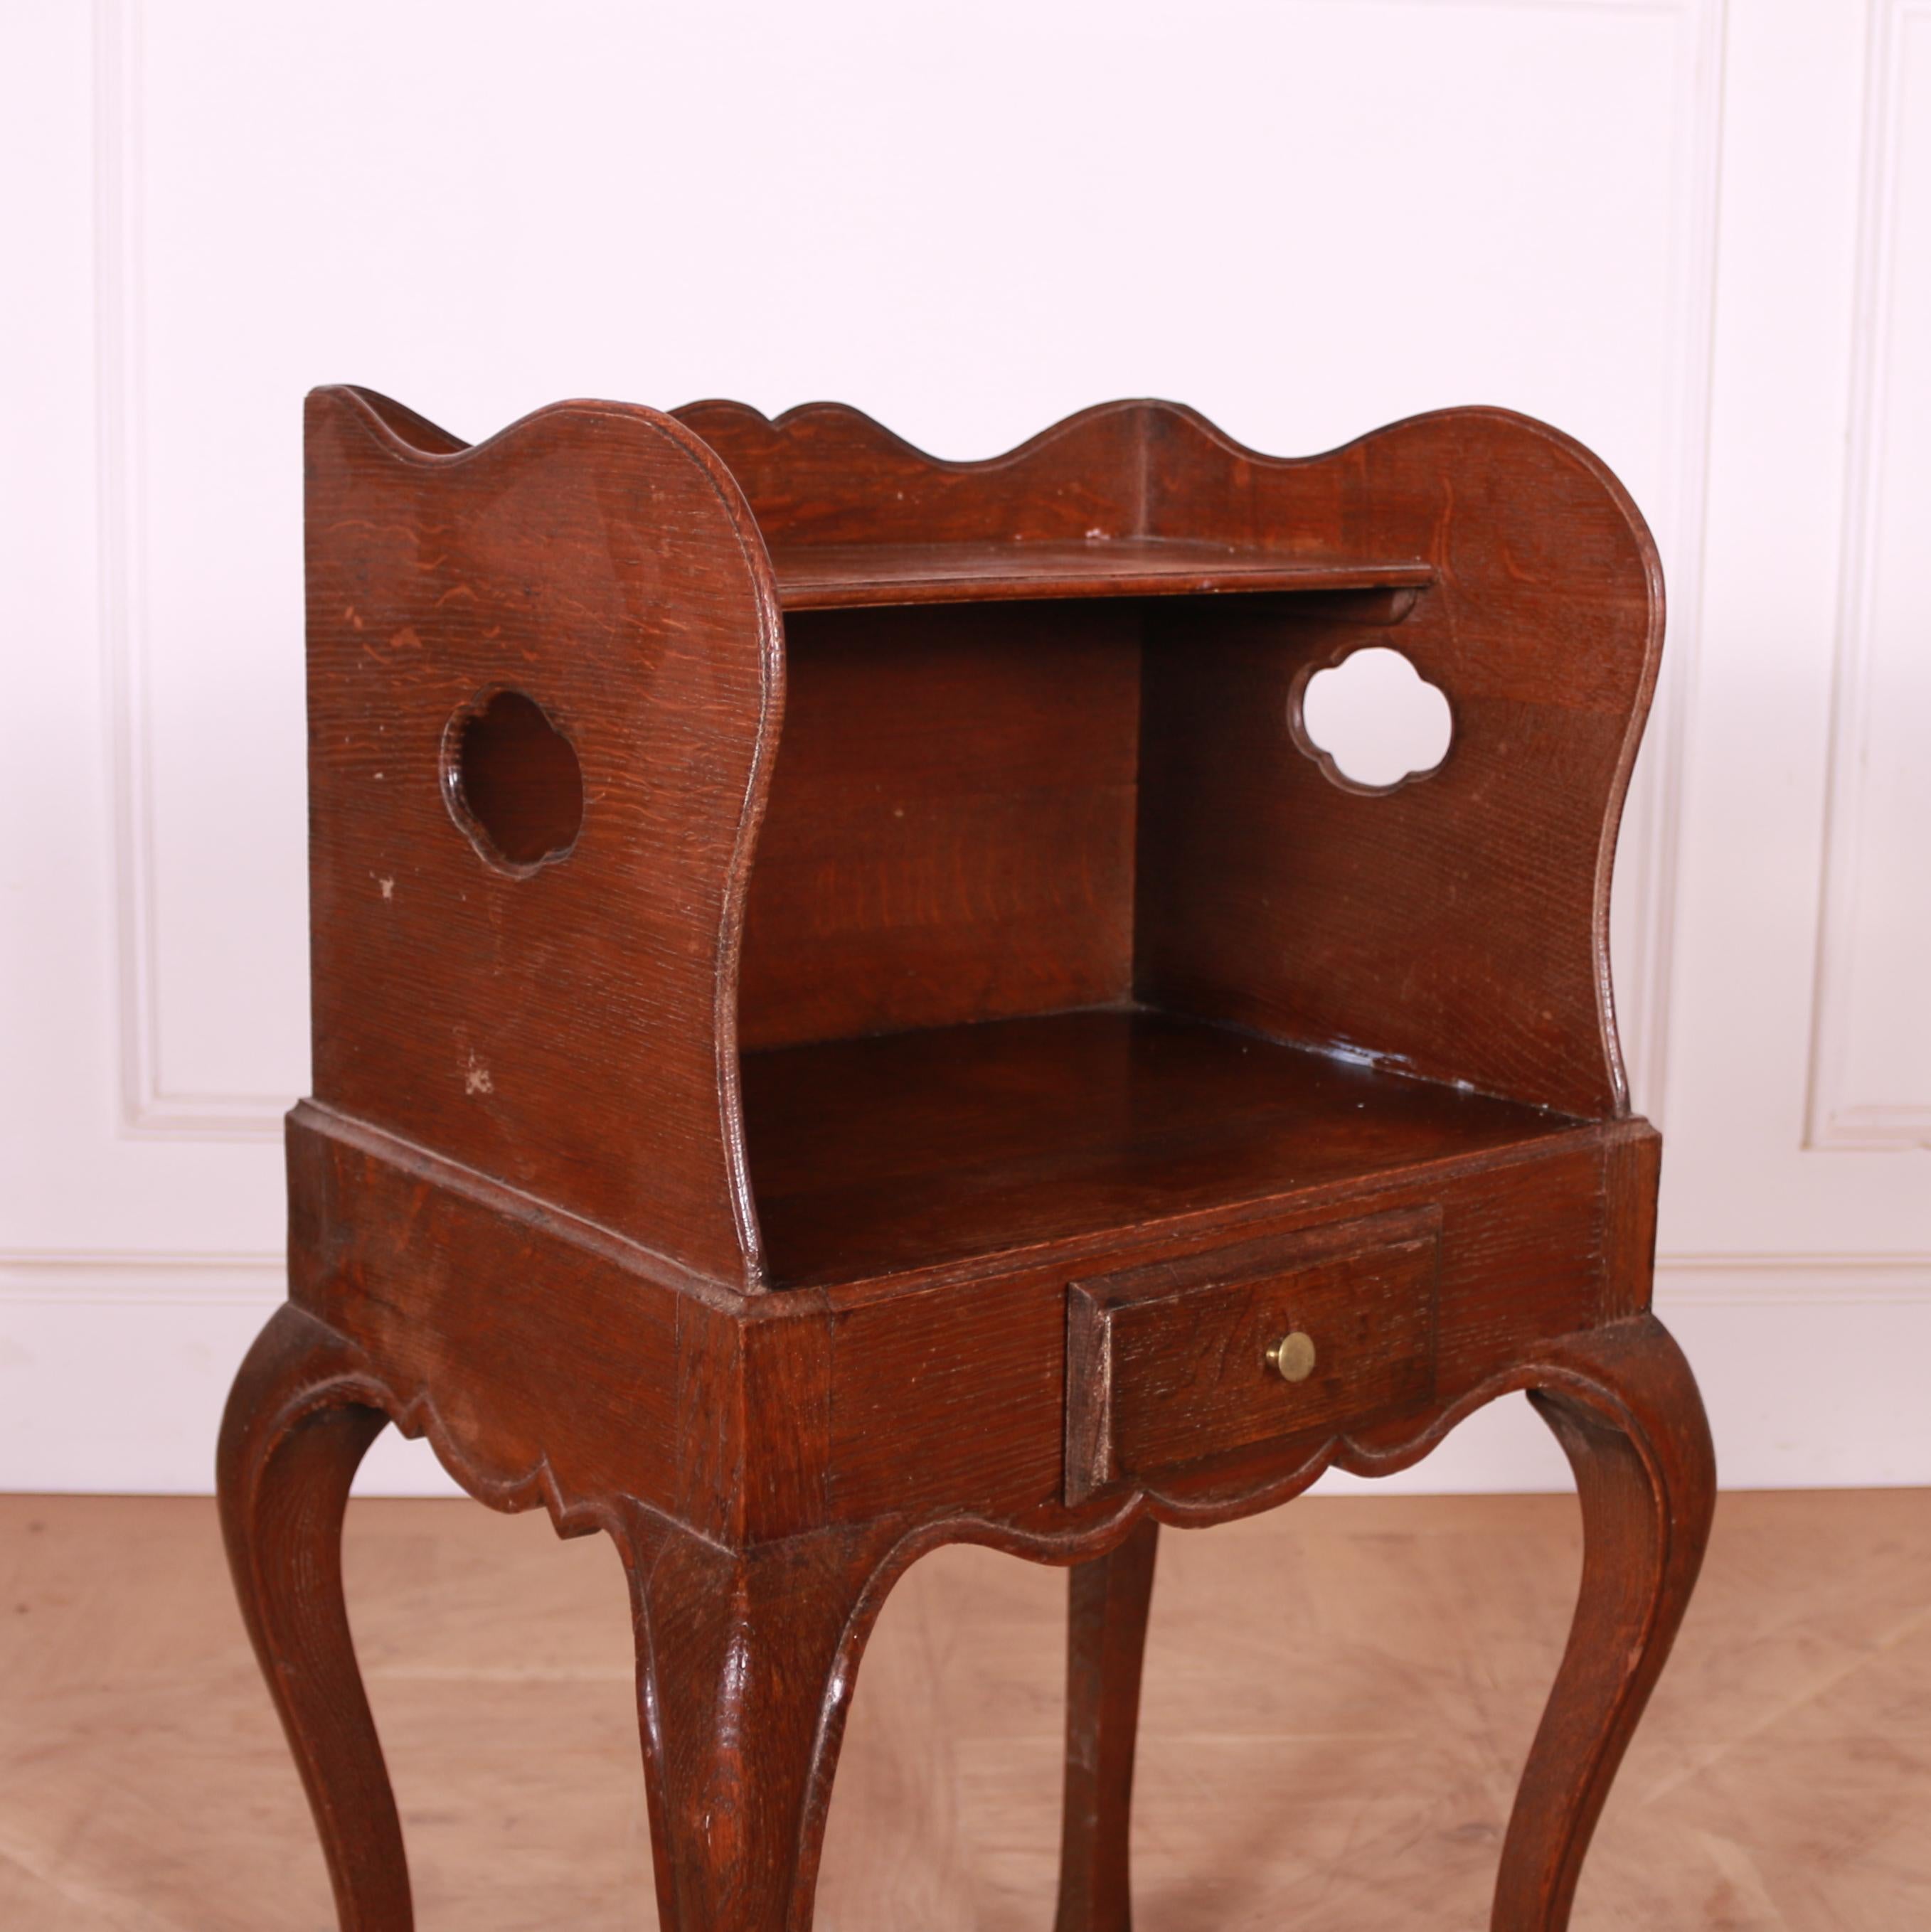 Late 19th century French oak bedside table. Very pretty. 1890.

Reference: 7716

Dimensions
18 inches (46 cms) wide
14 inches (36 cms) deep
30 inches (76 cms) high.